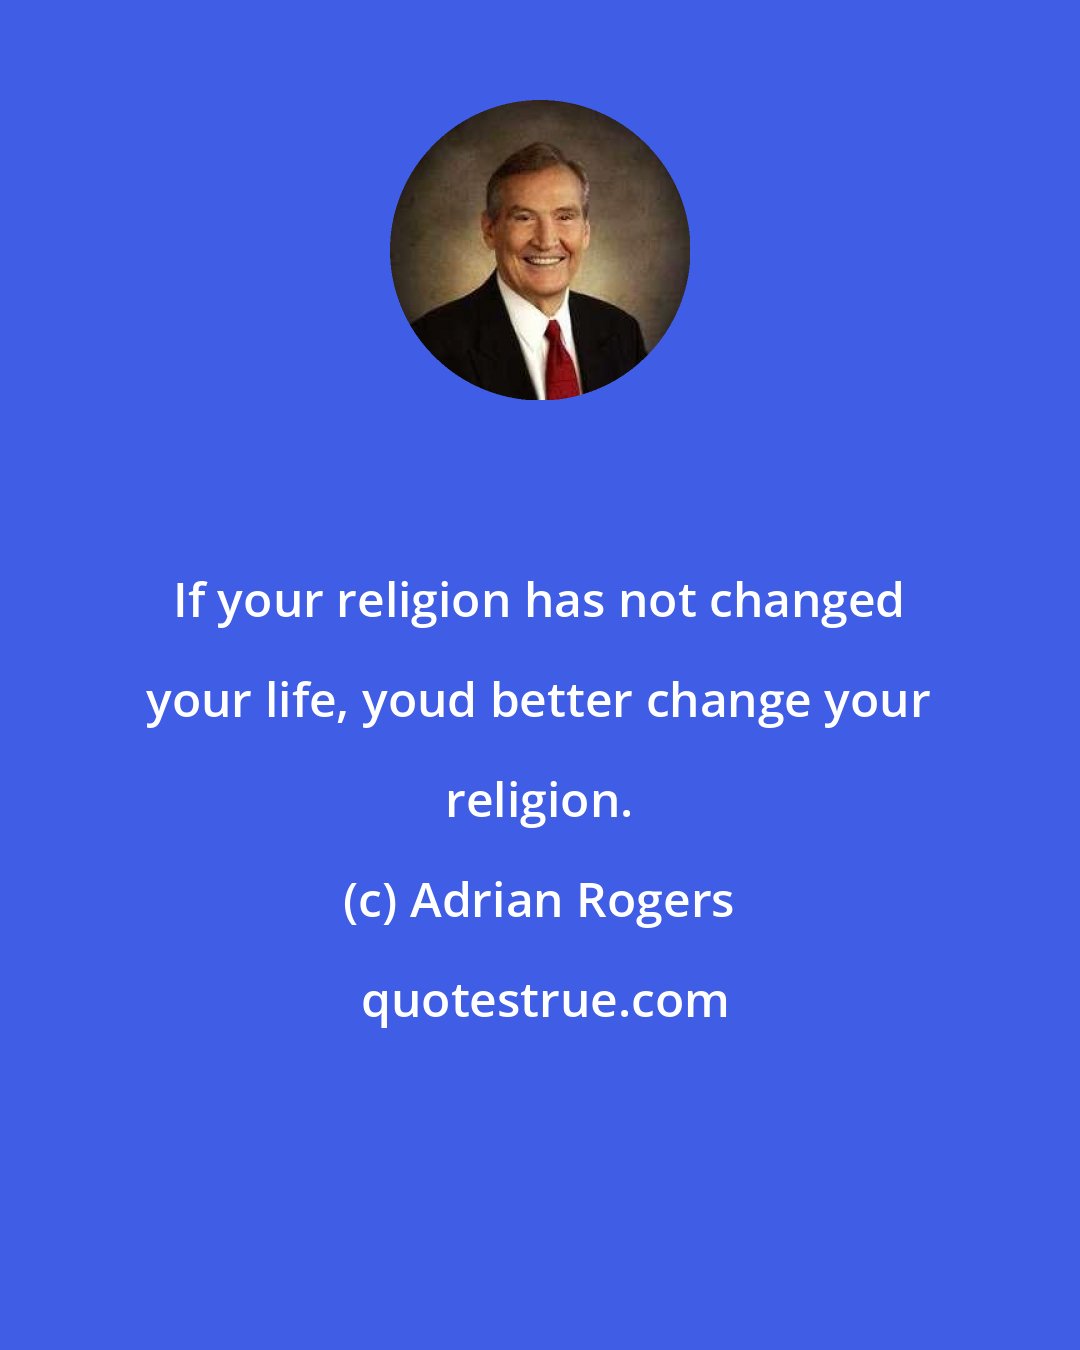 Adrian Rogers: If your religion has not changed your life, youd better change your religion.